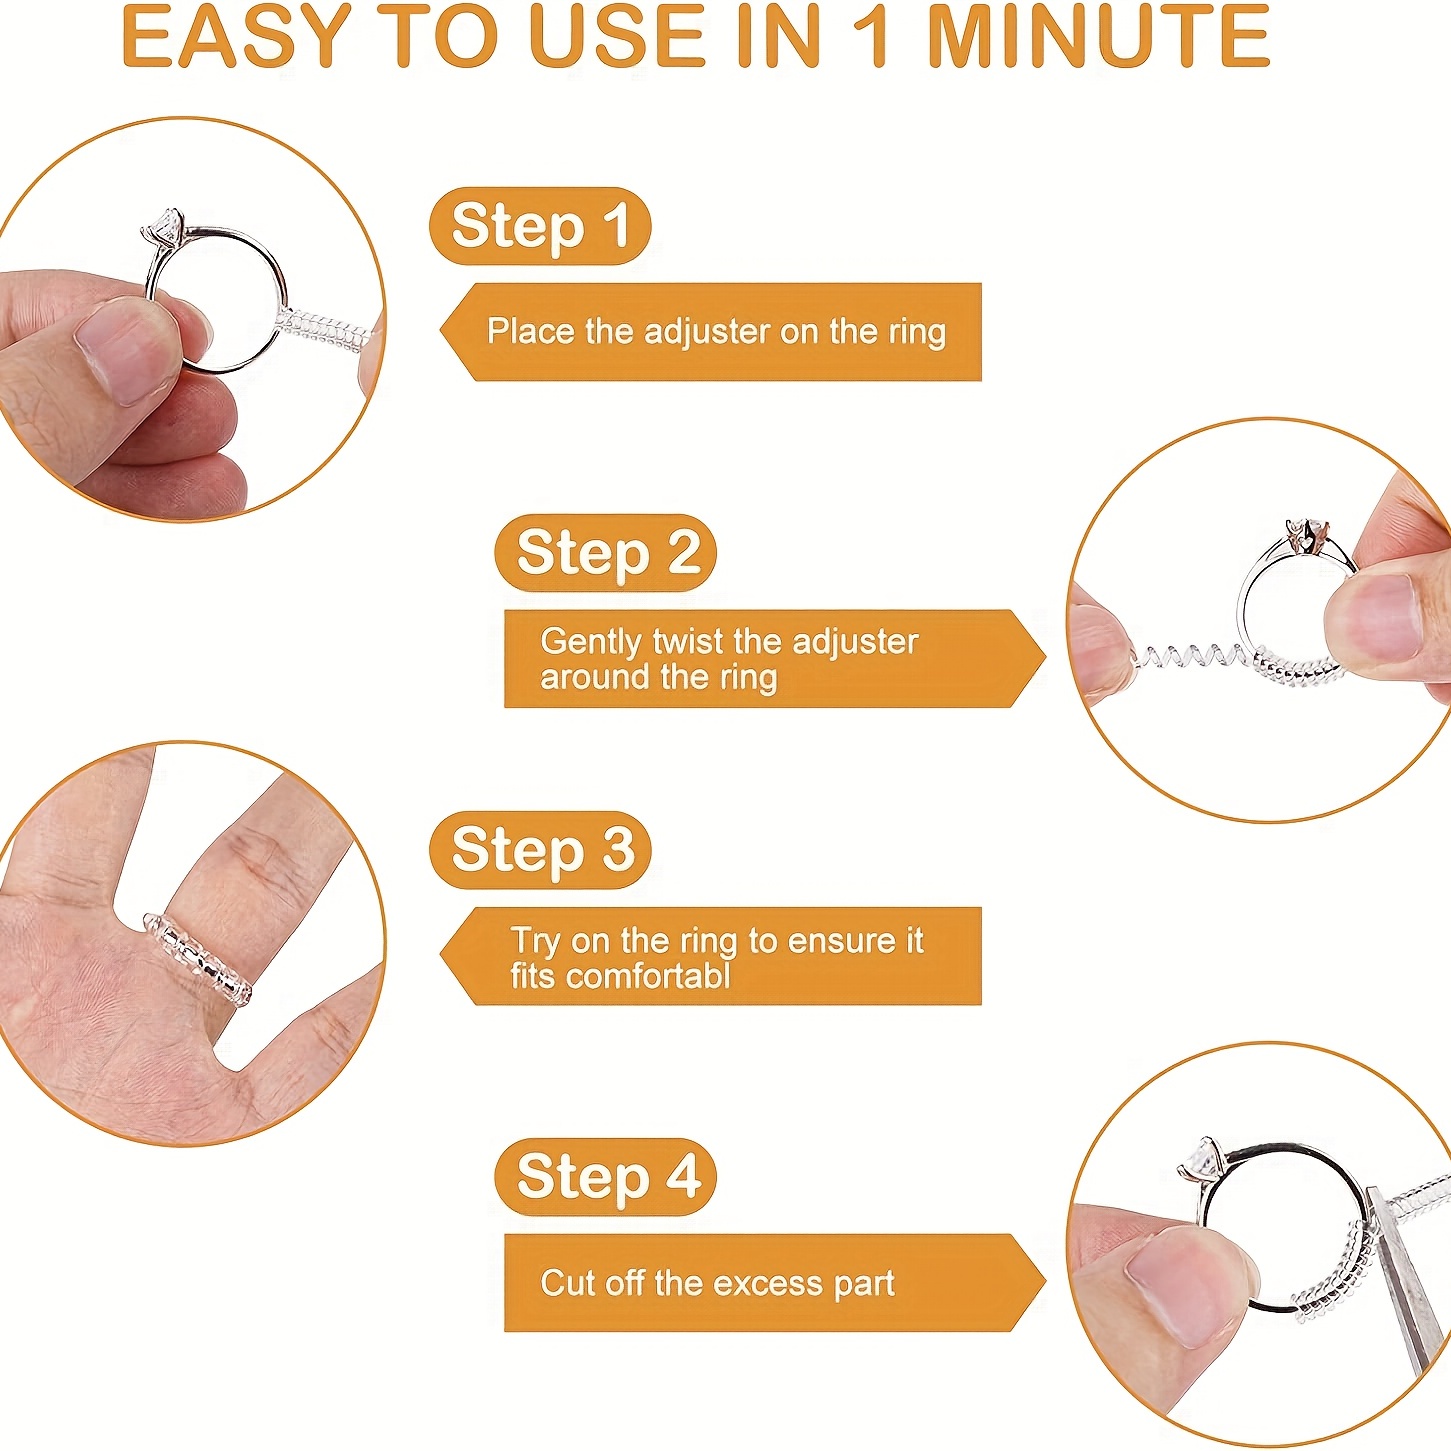 How to resize your ring in less than 1 minute